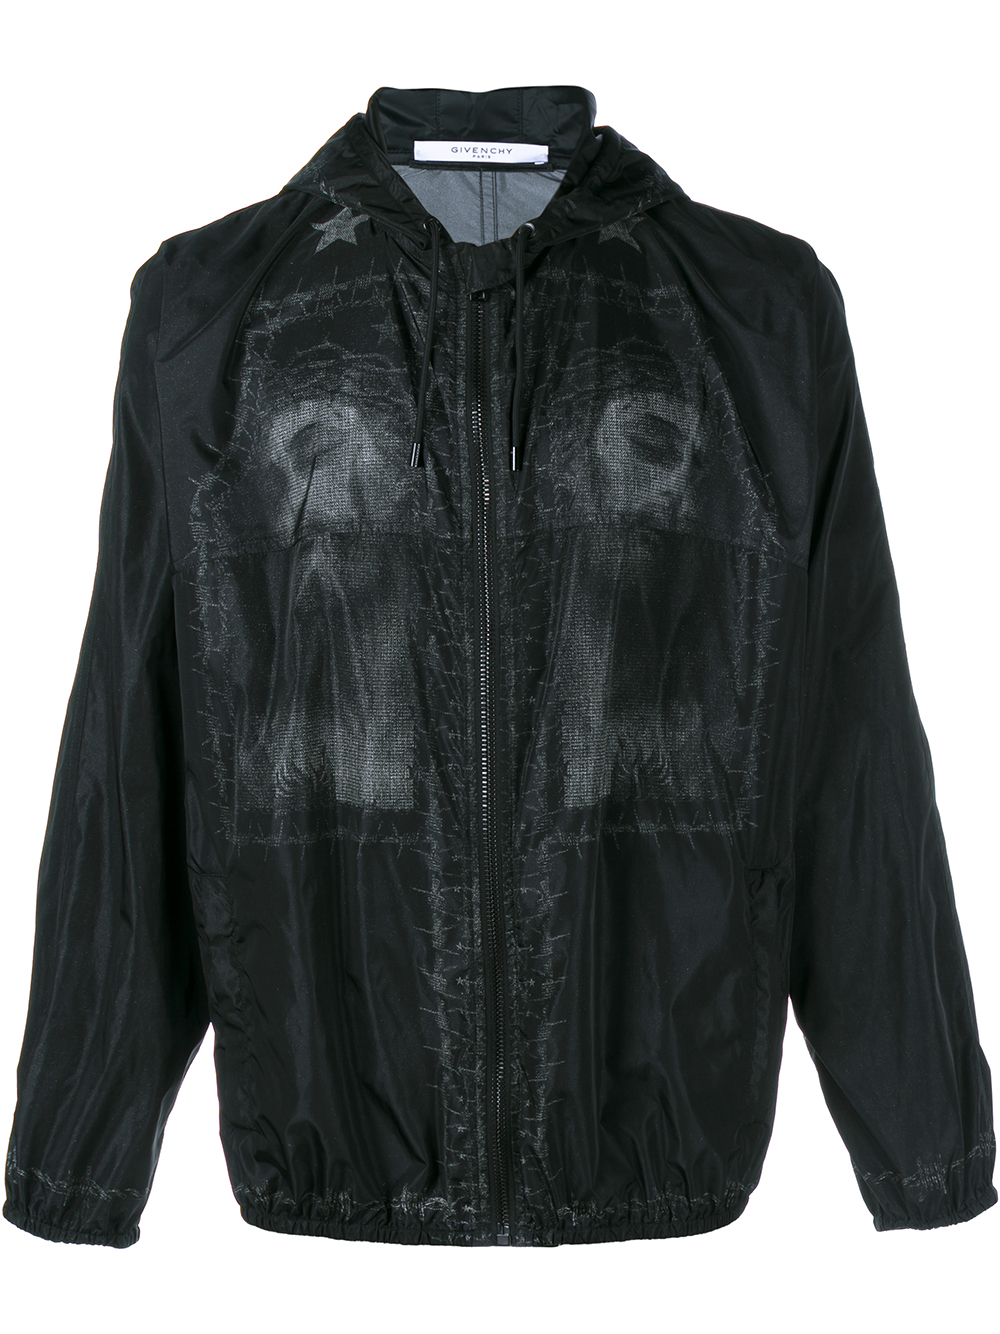 Lyst - Givenchy Barb Wire Jesus Print Windbreaker Jacket in Black for Men